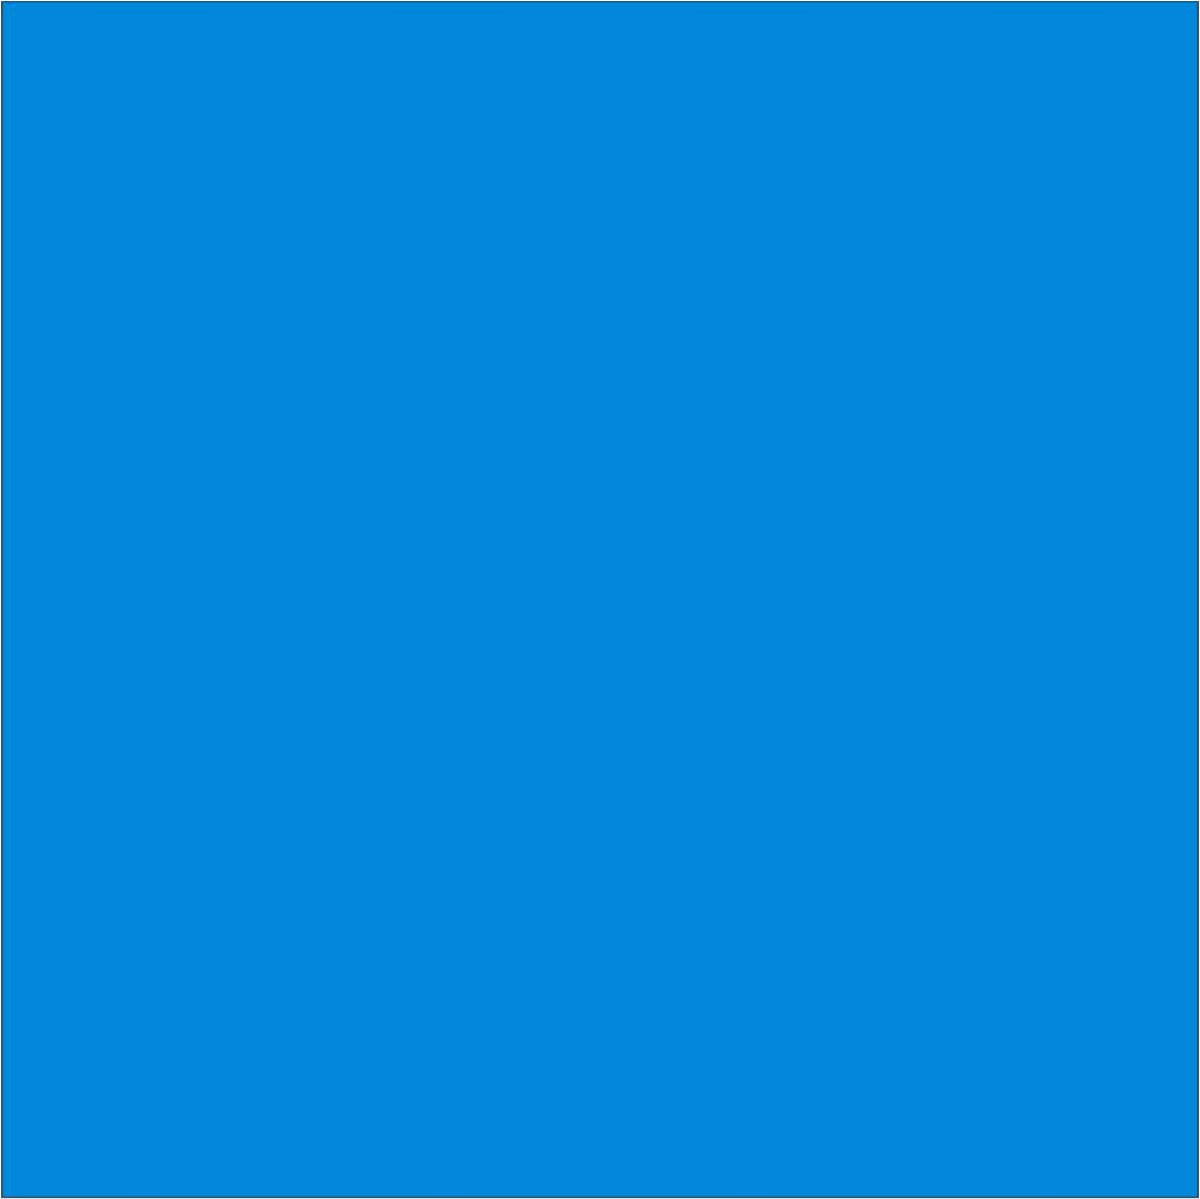 Premium DecoFlock Royal Blue HTV 12in x 15in Sheets SALE While Supplies Last